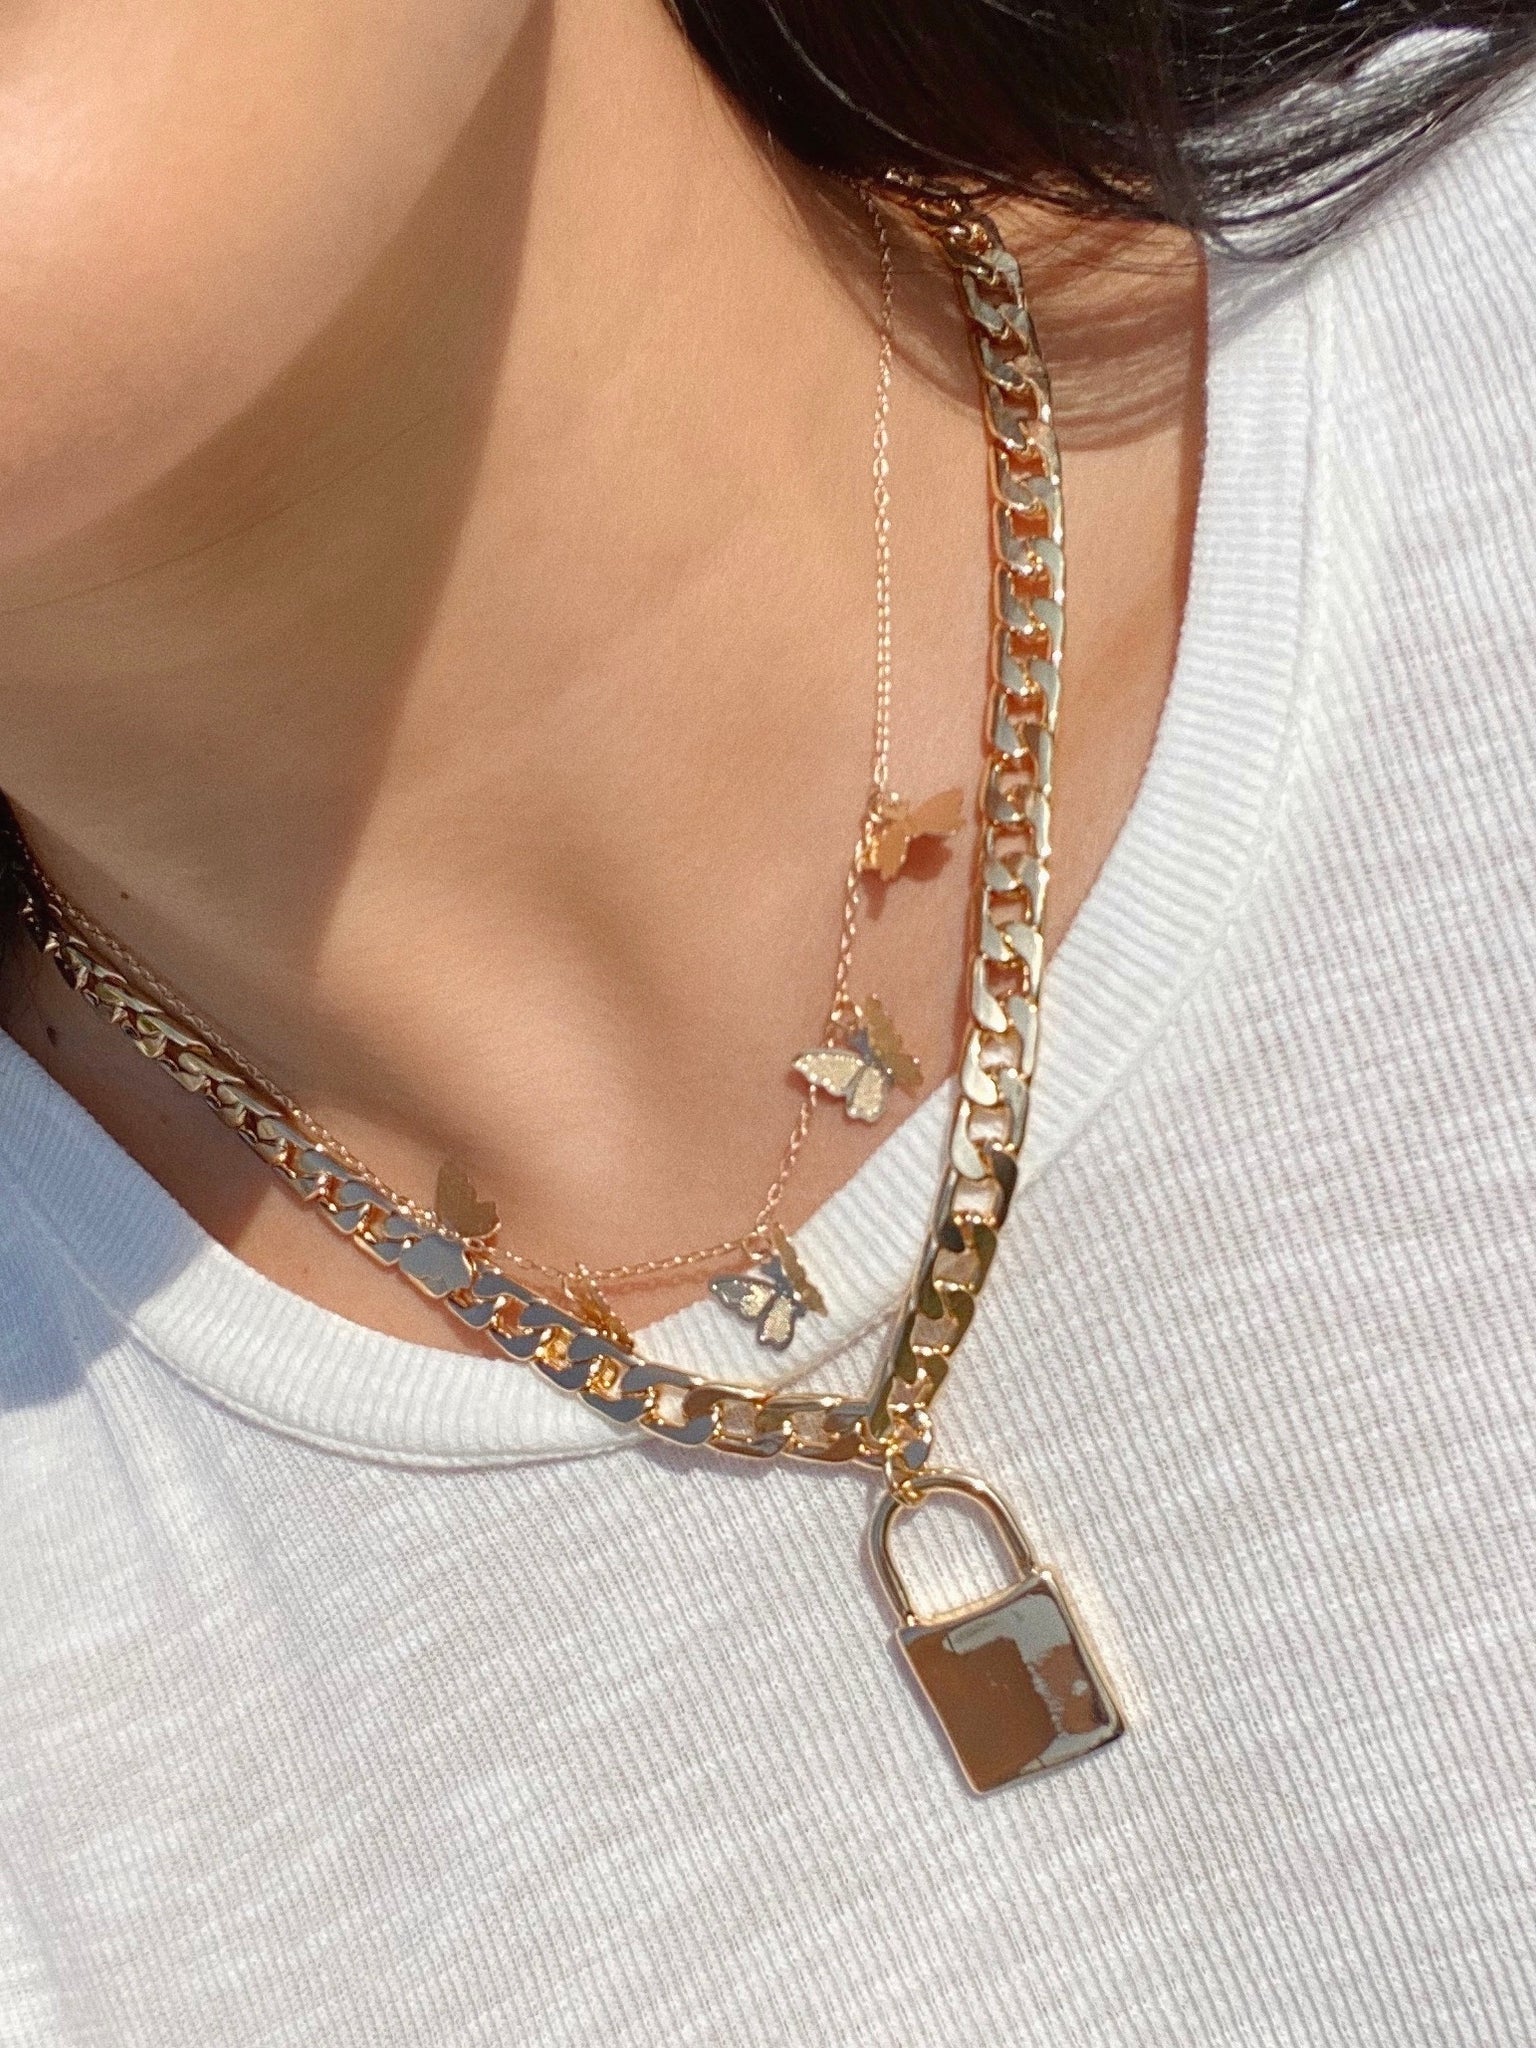 locked in love necklace